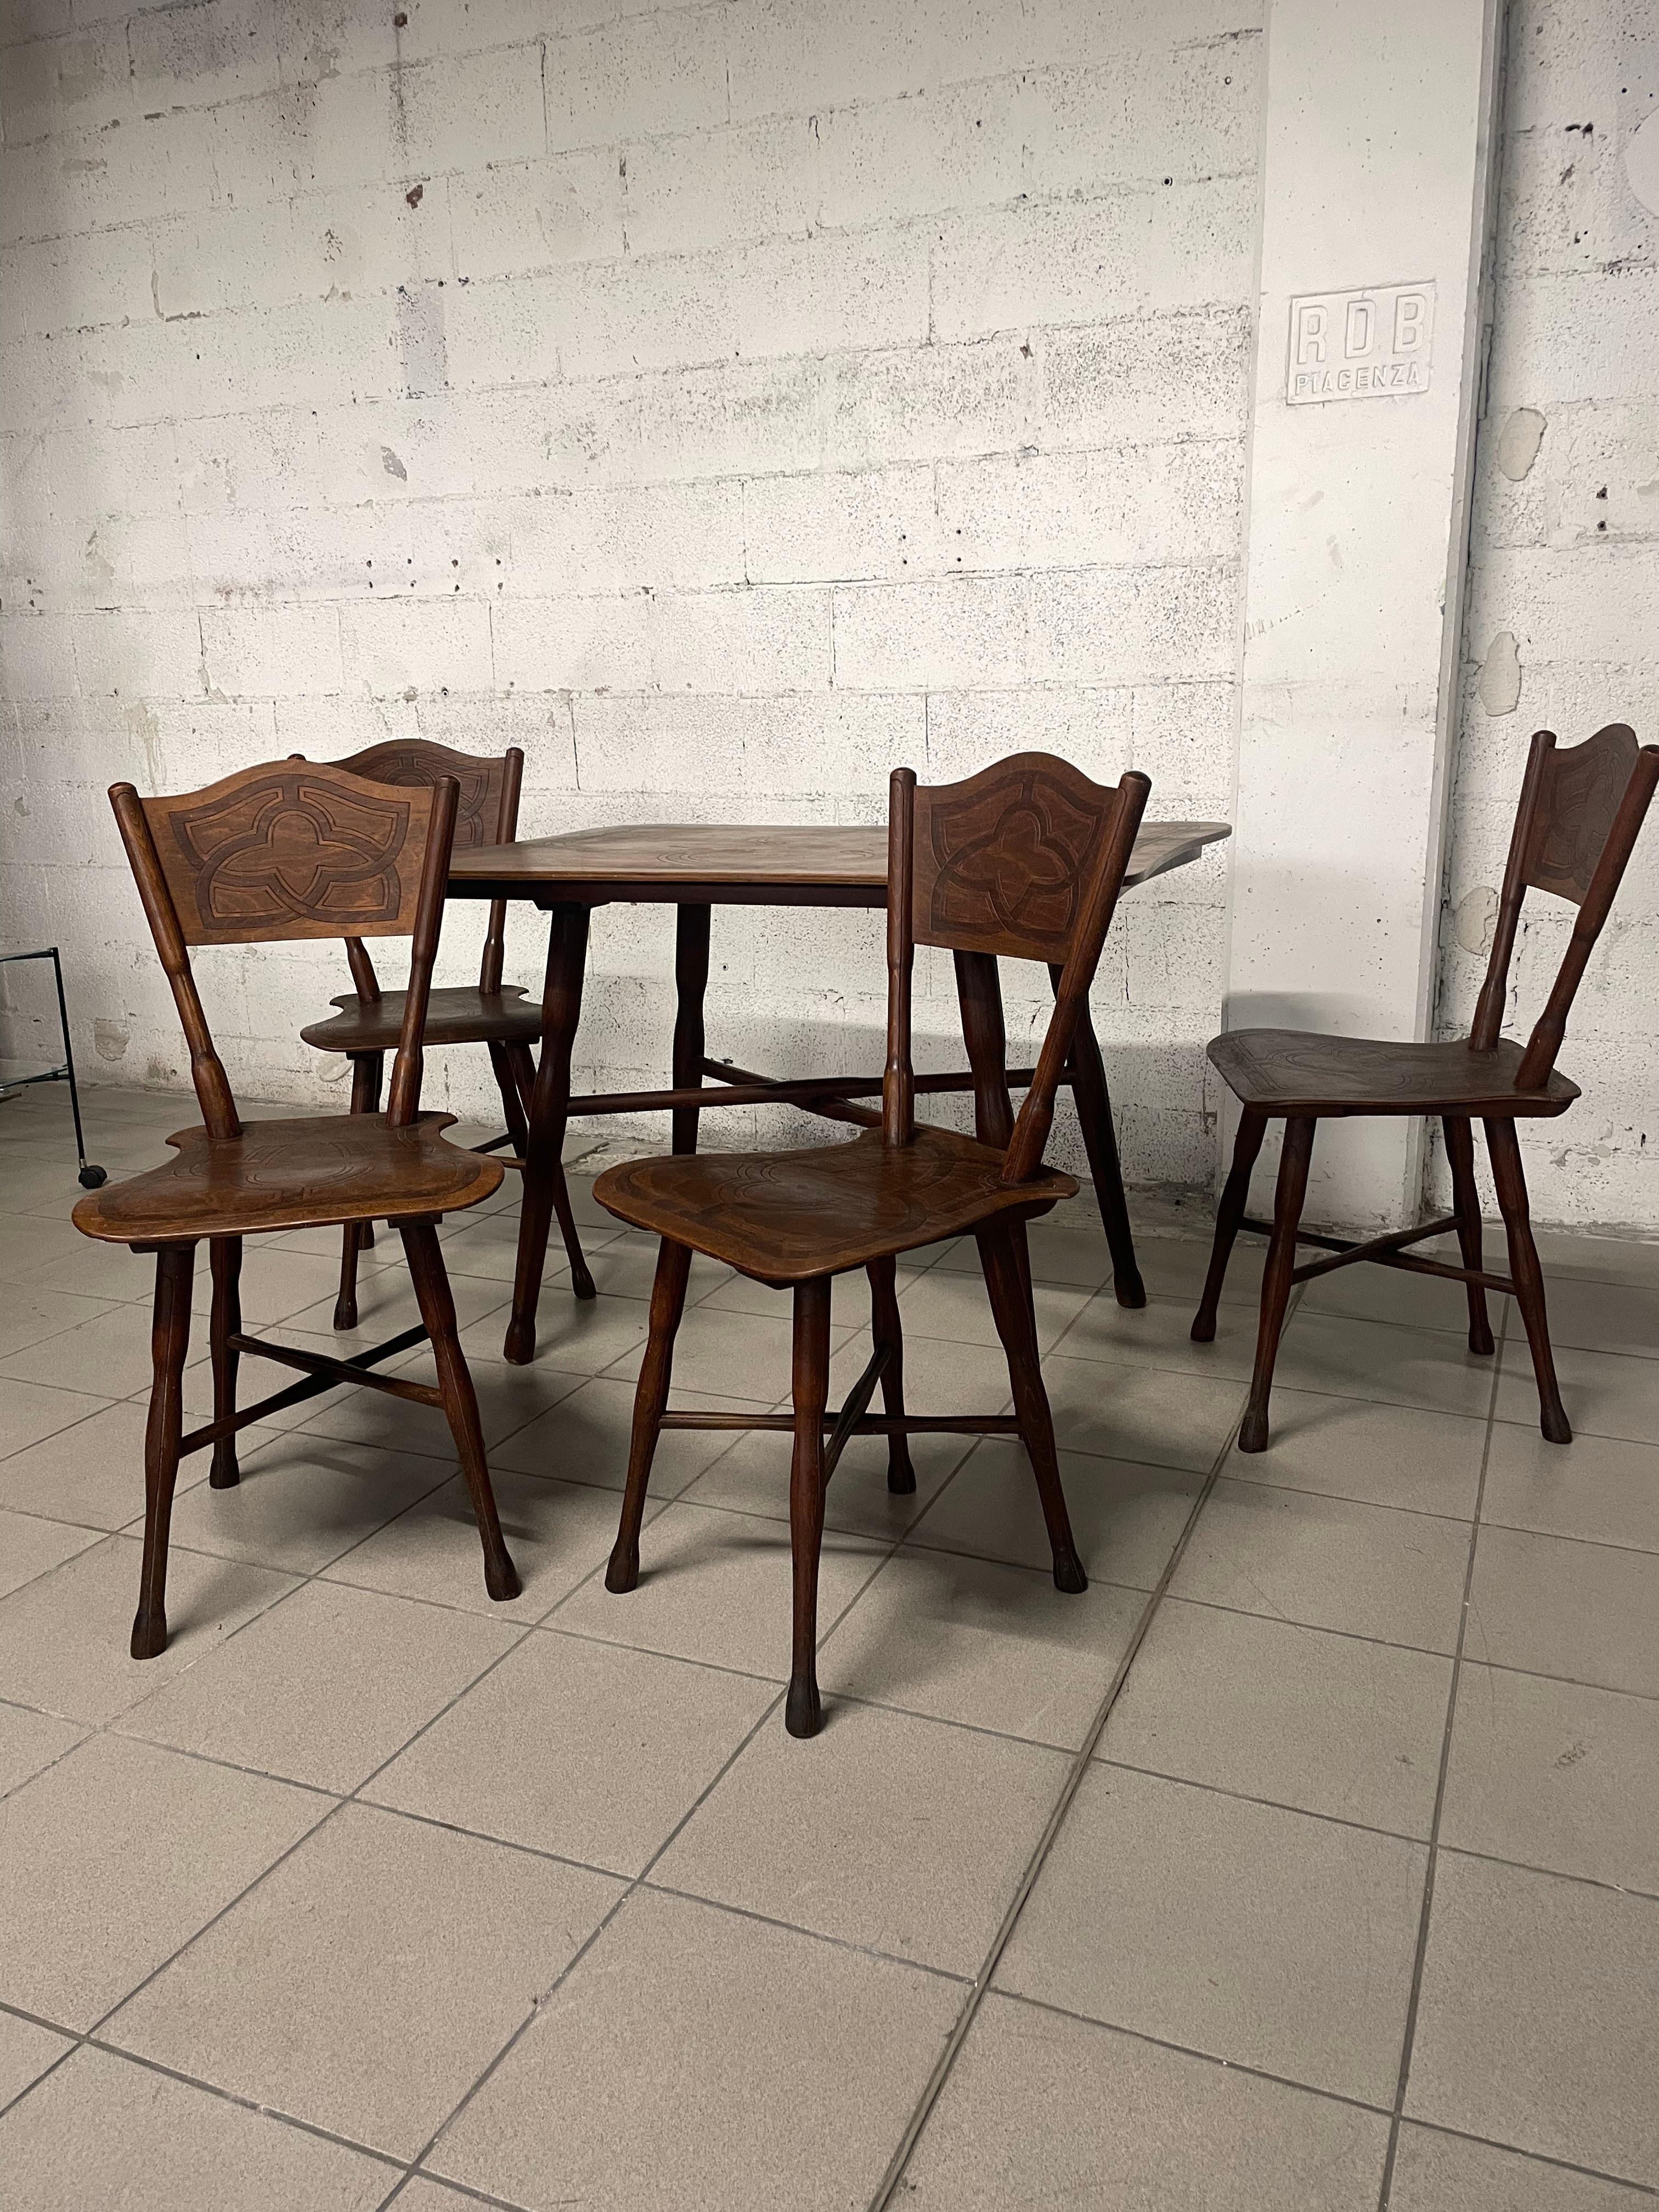 Set of 4 Thonet chairs and table, Austria, first half of 20th century For Sale 2